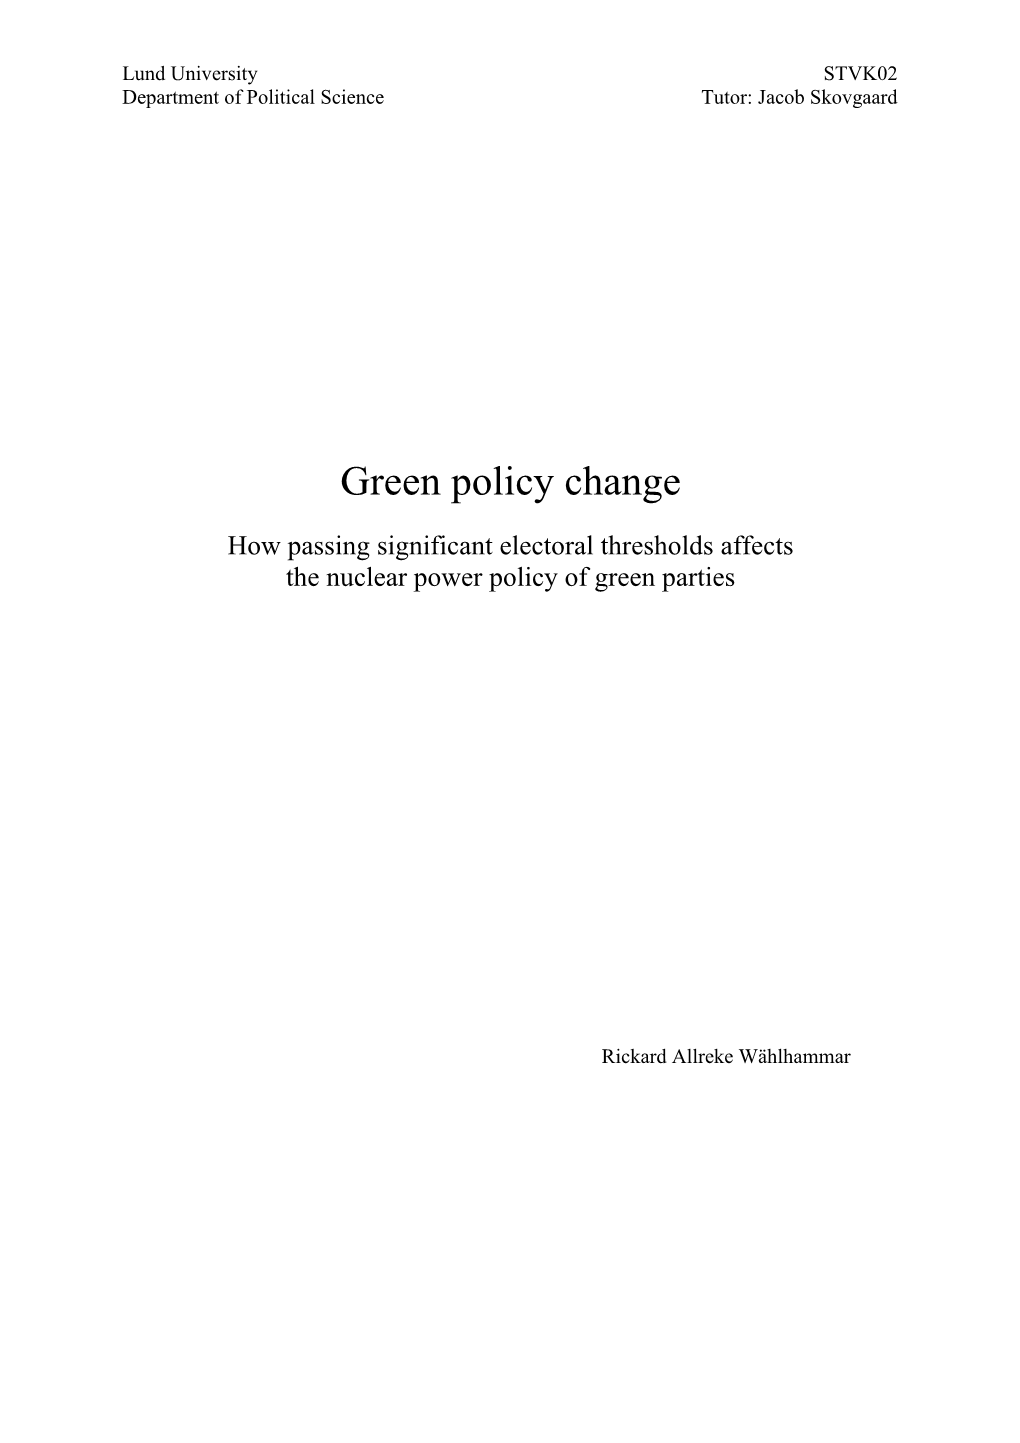 Green Policy Change